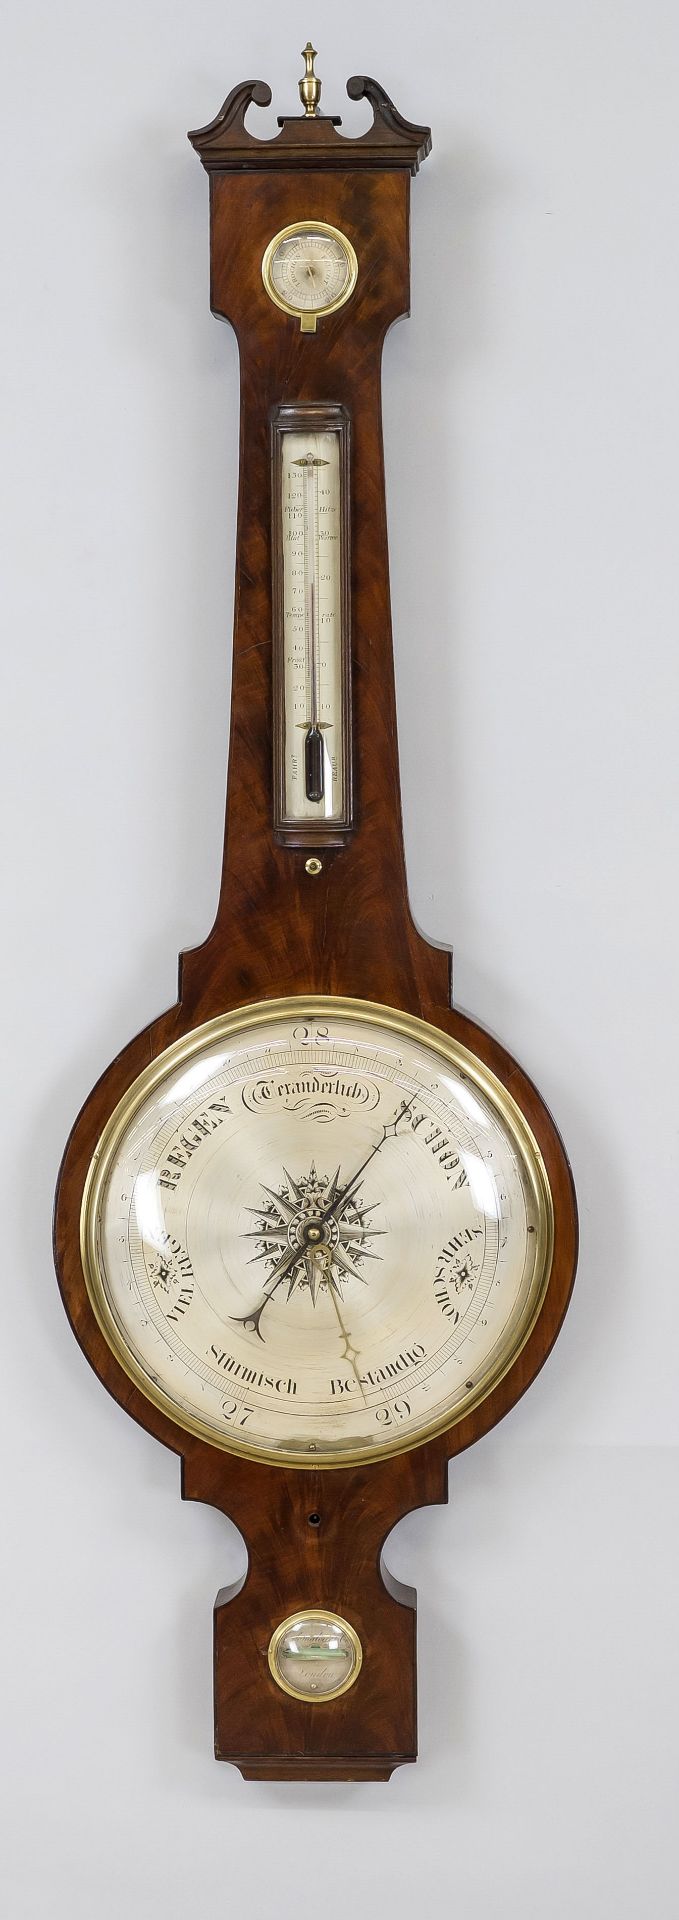 Large weather station for the wall, probably England, late 19th century, mahogany veneer. Curved